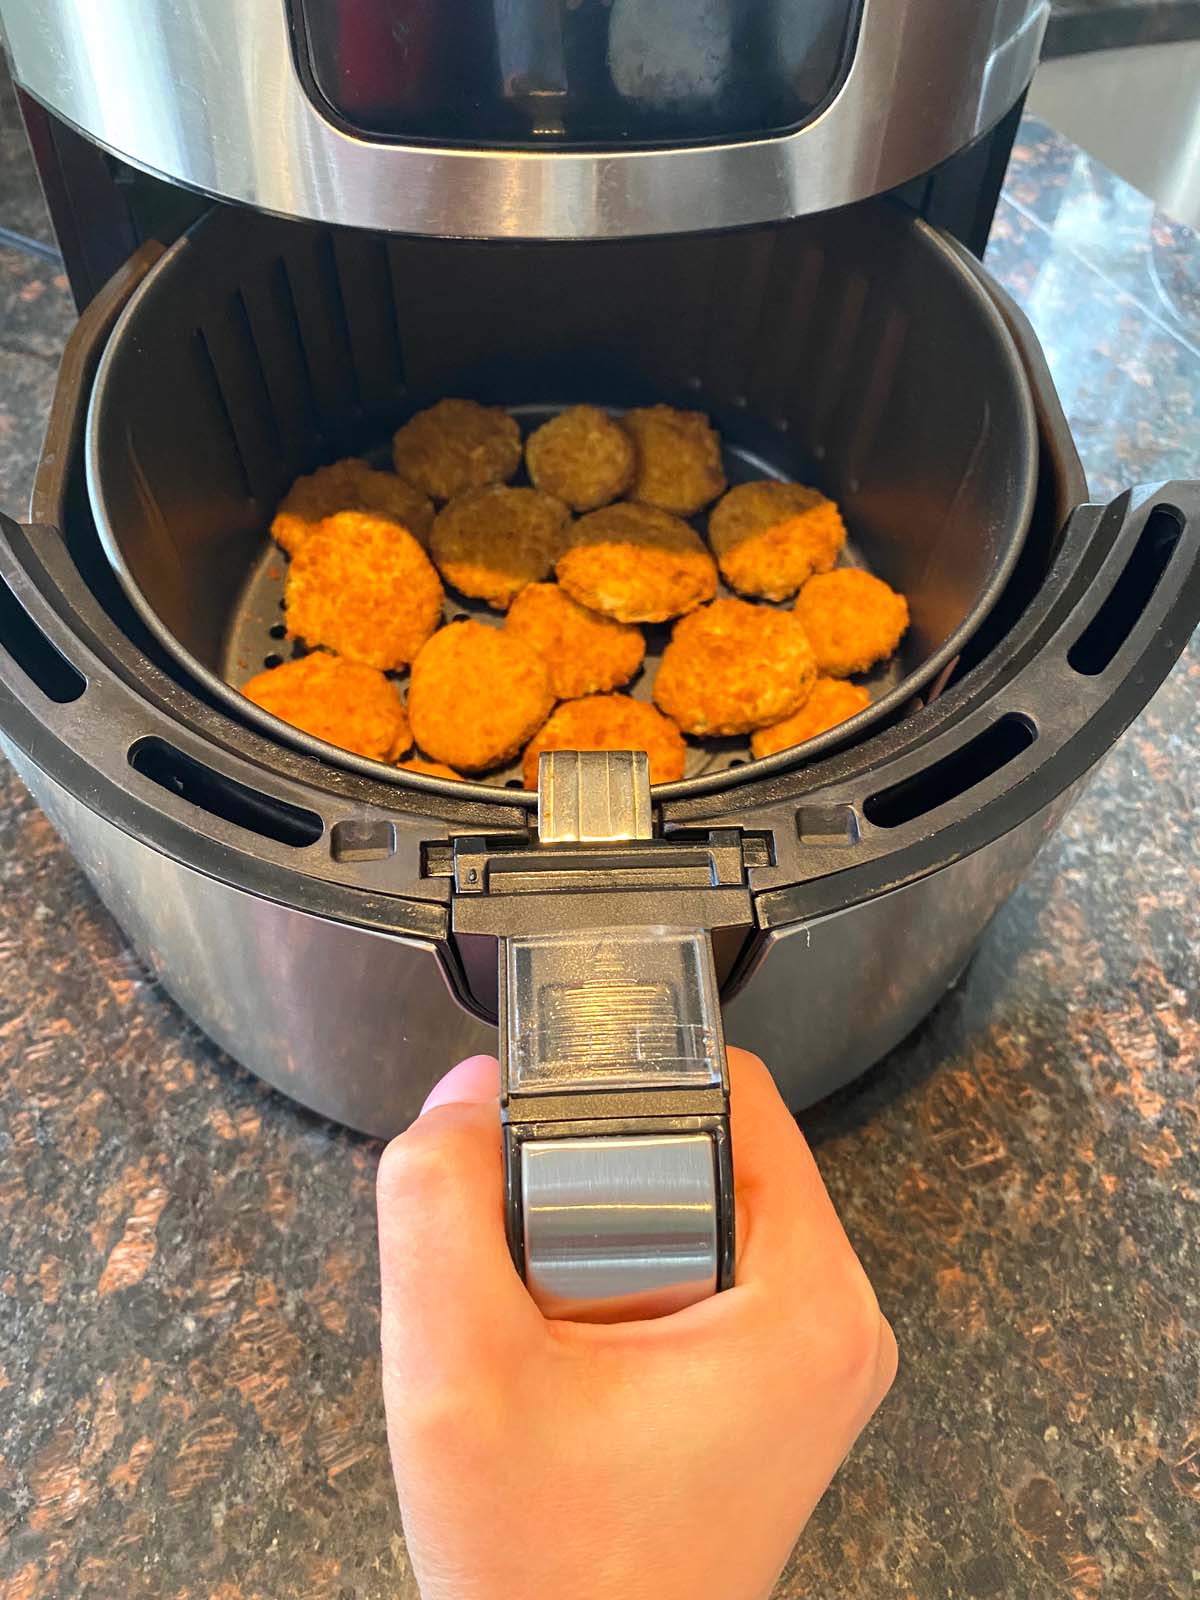 Hand pushing basket of frozen pickle chips into air frying machine.